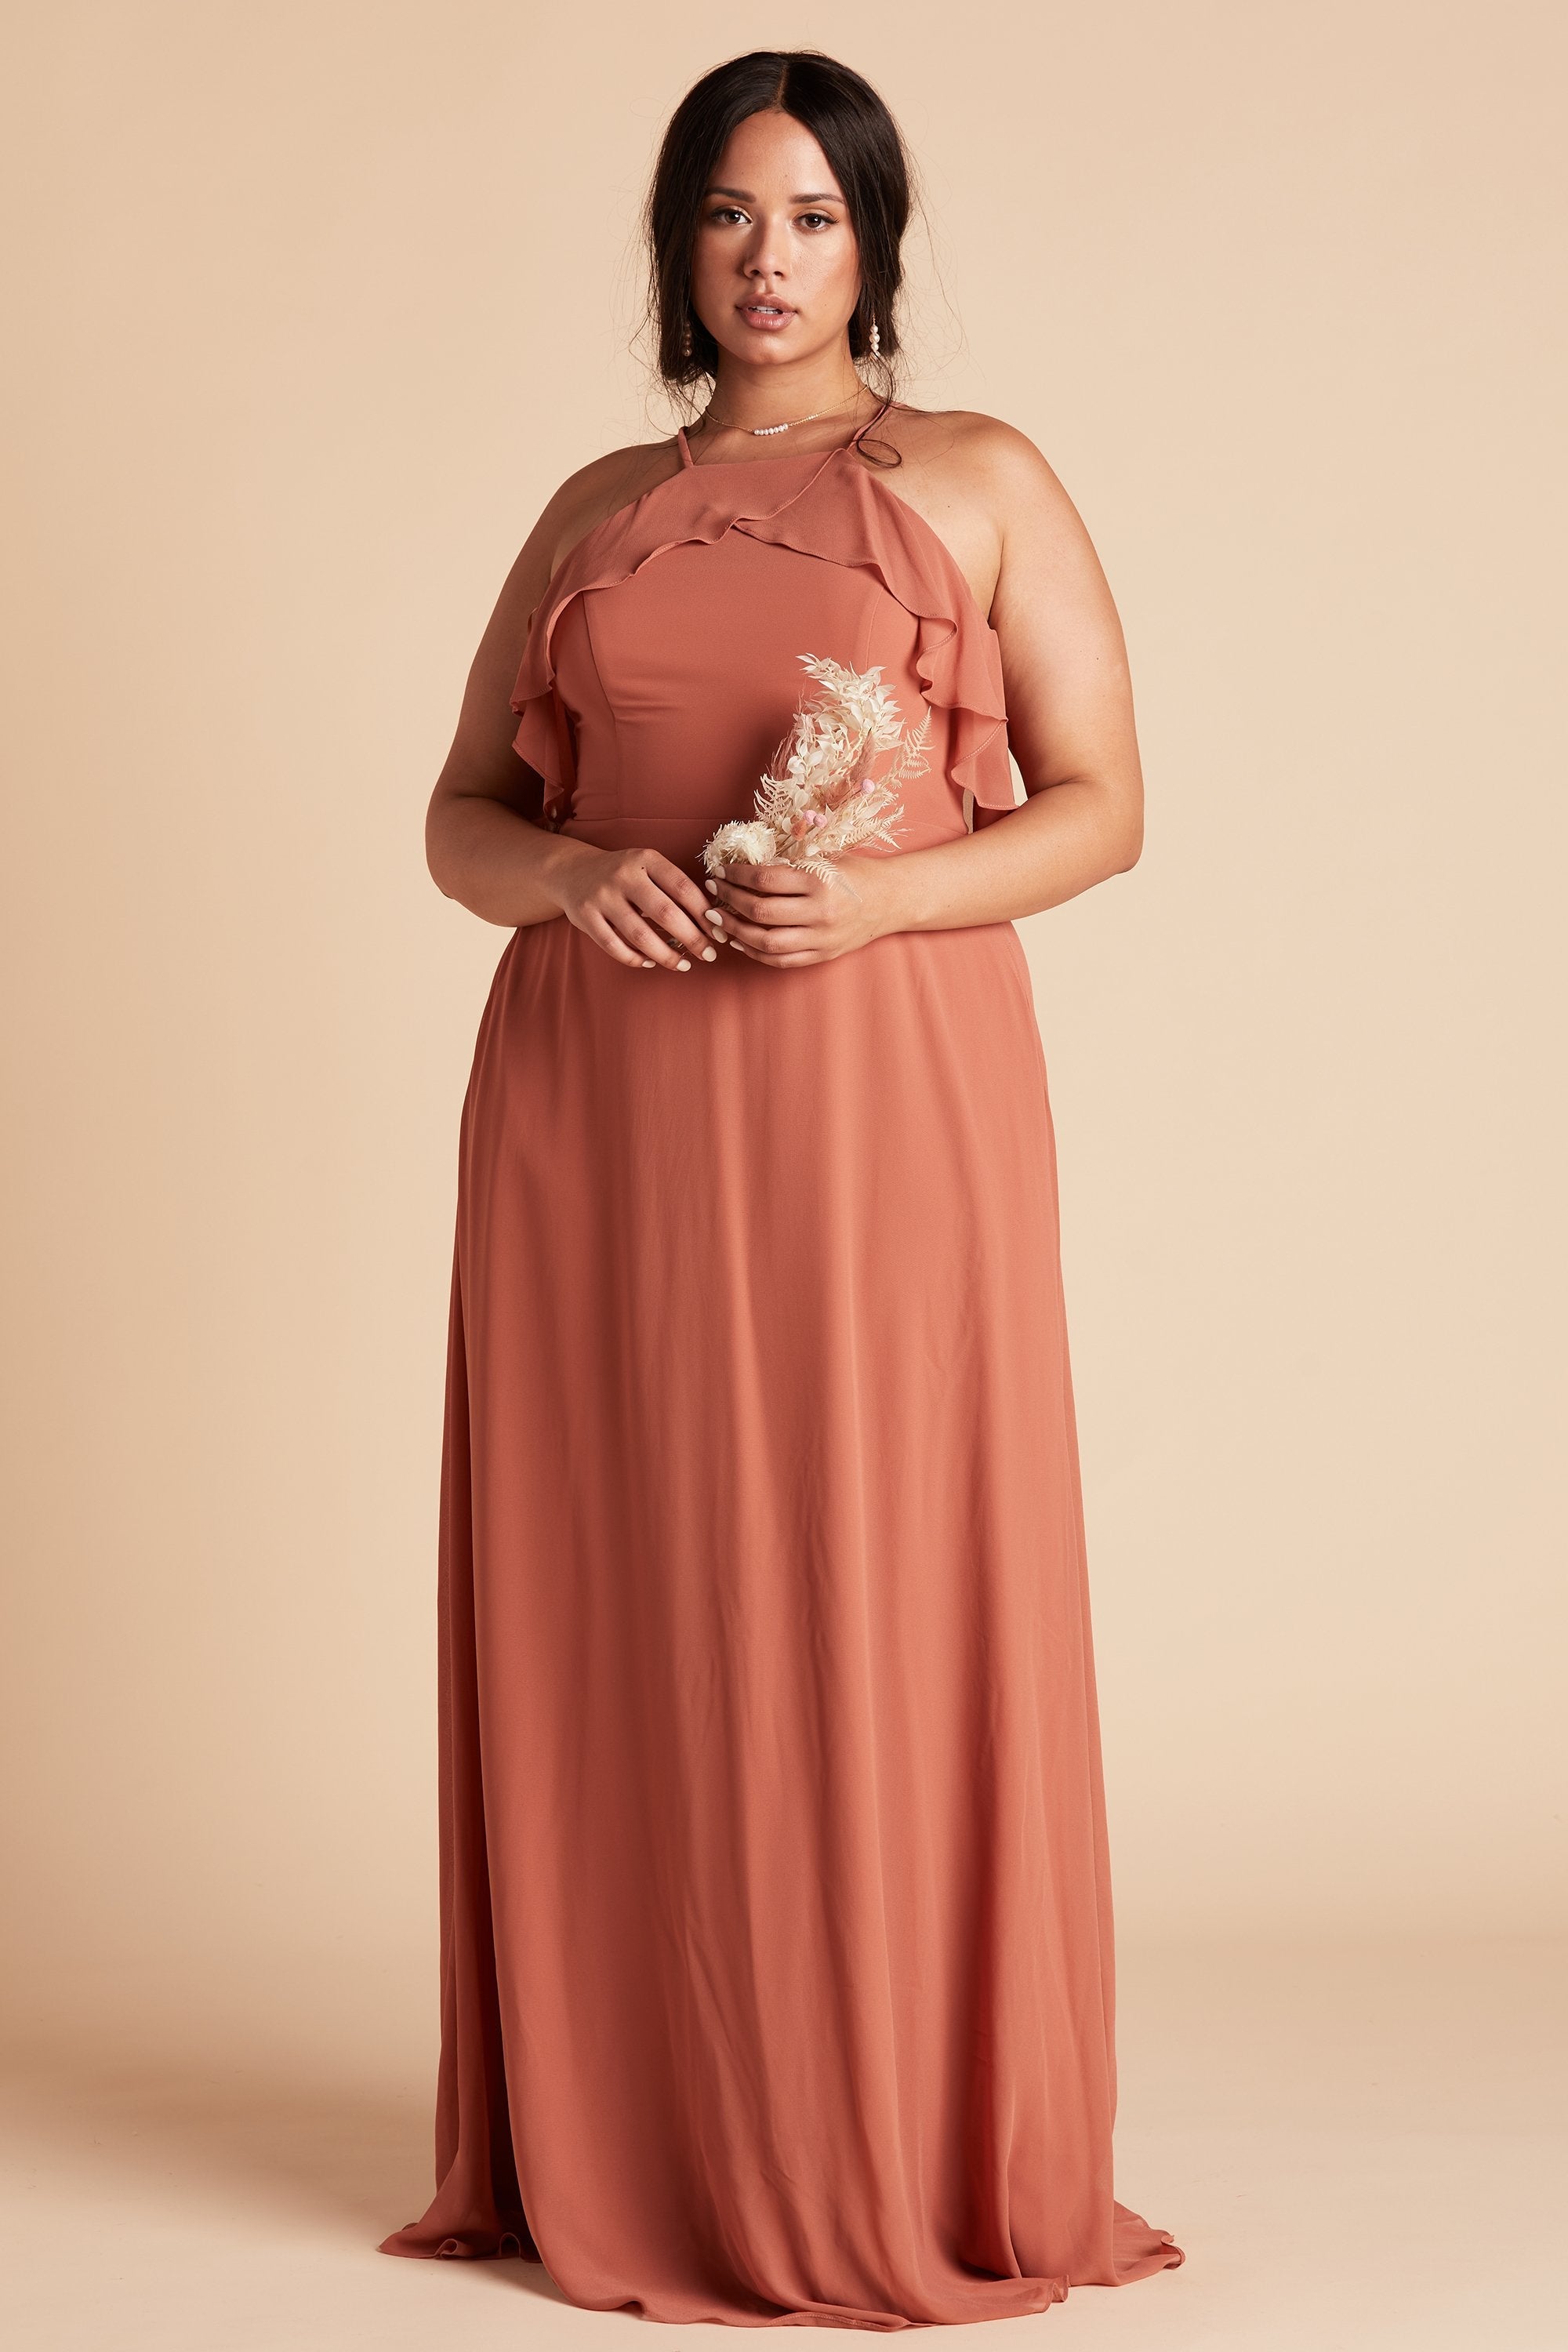 Jules plus size bridesmaid dress in terracotta orange chiffon by Birdy Grey, front view